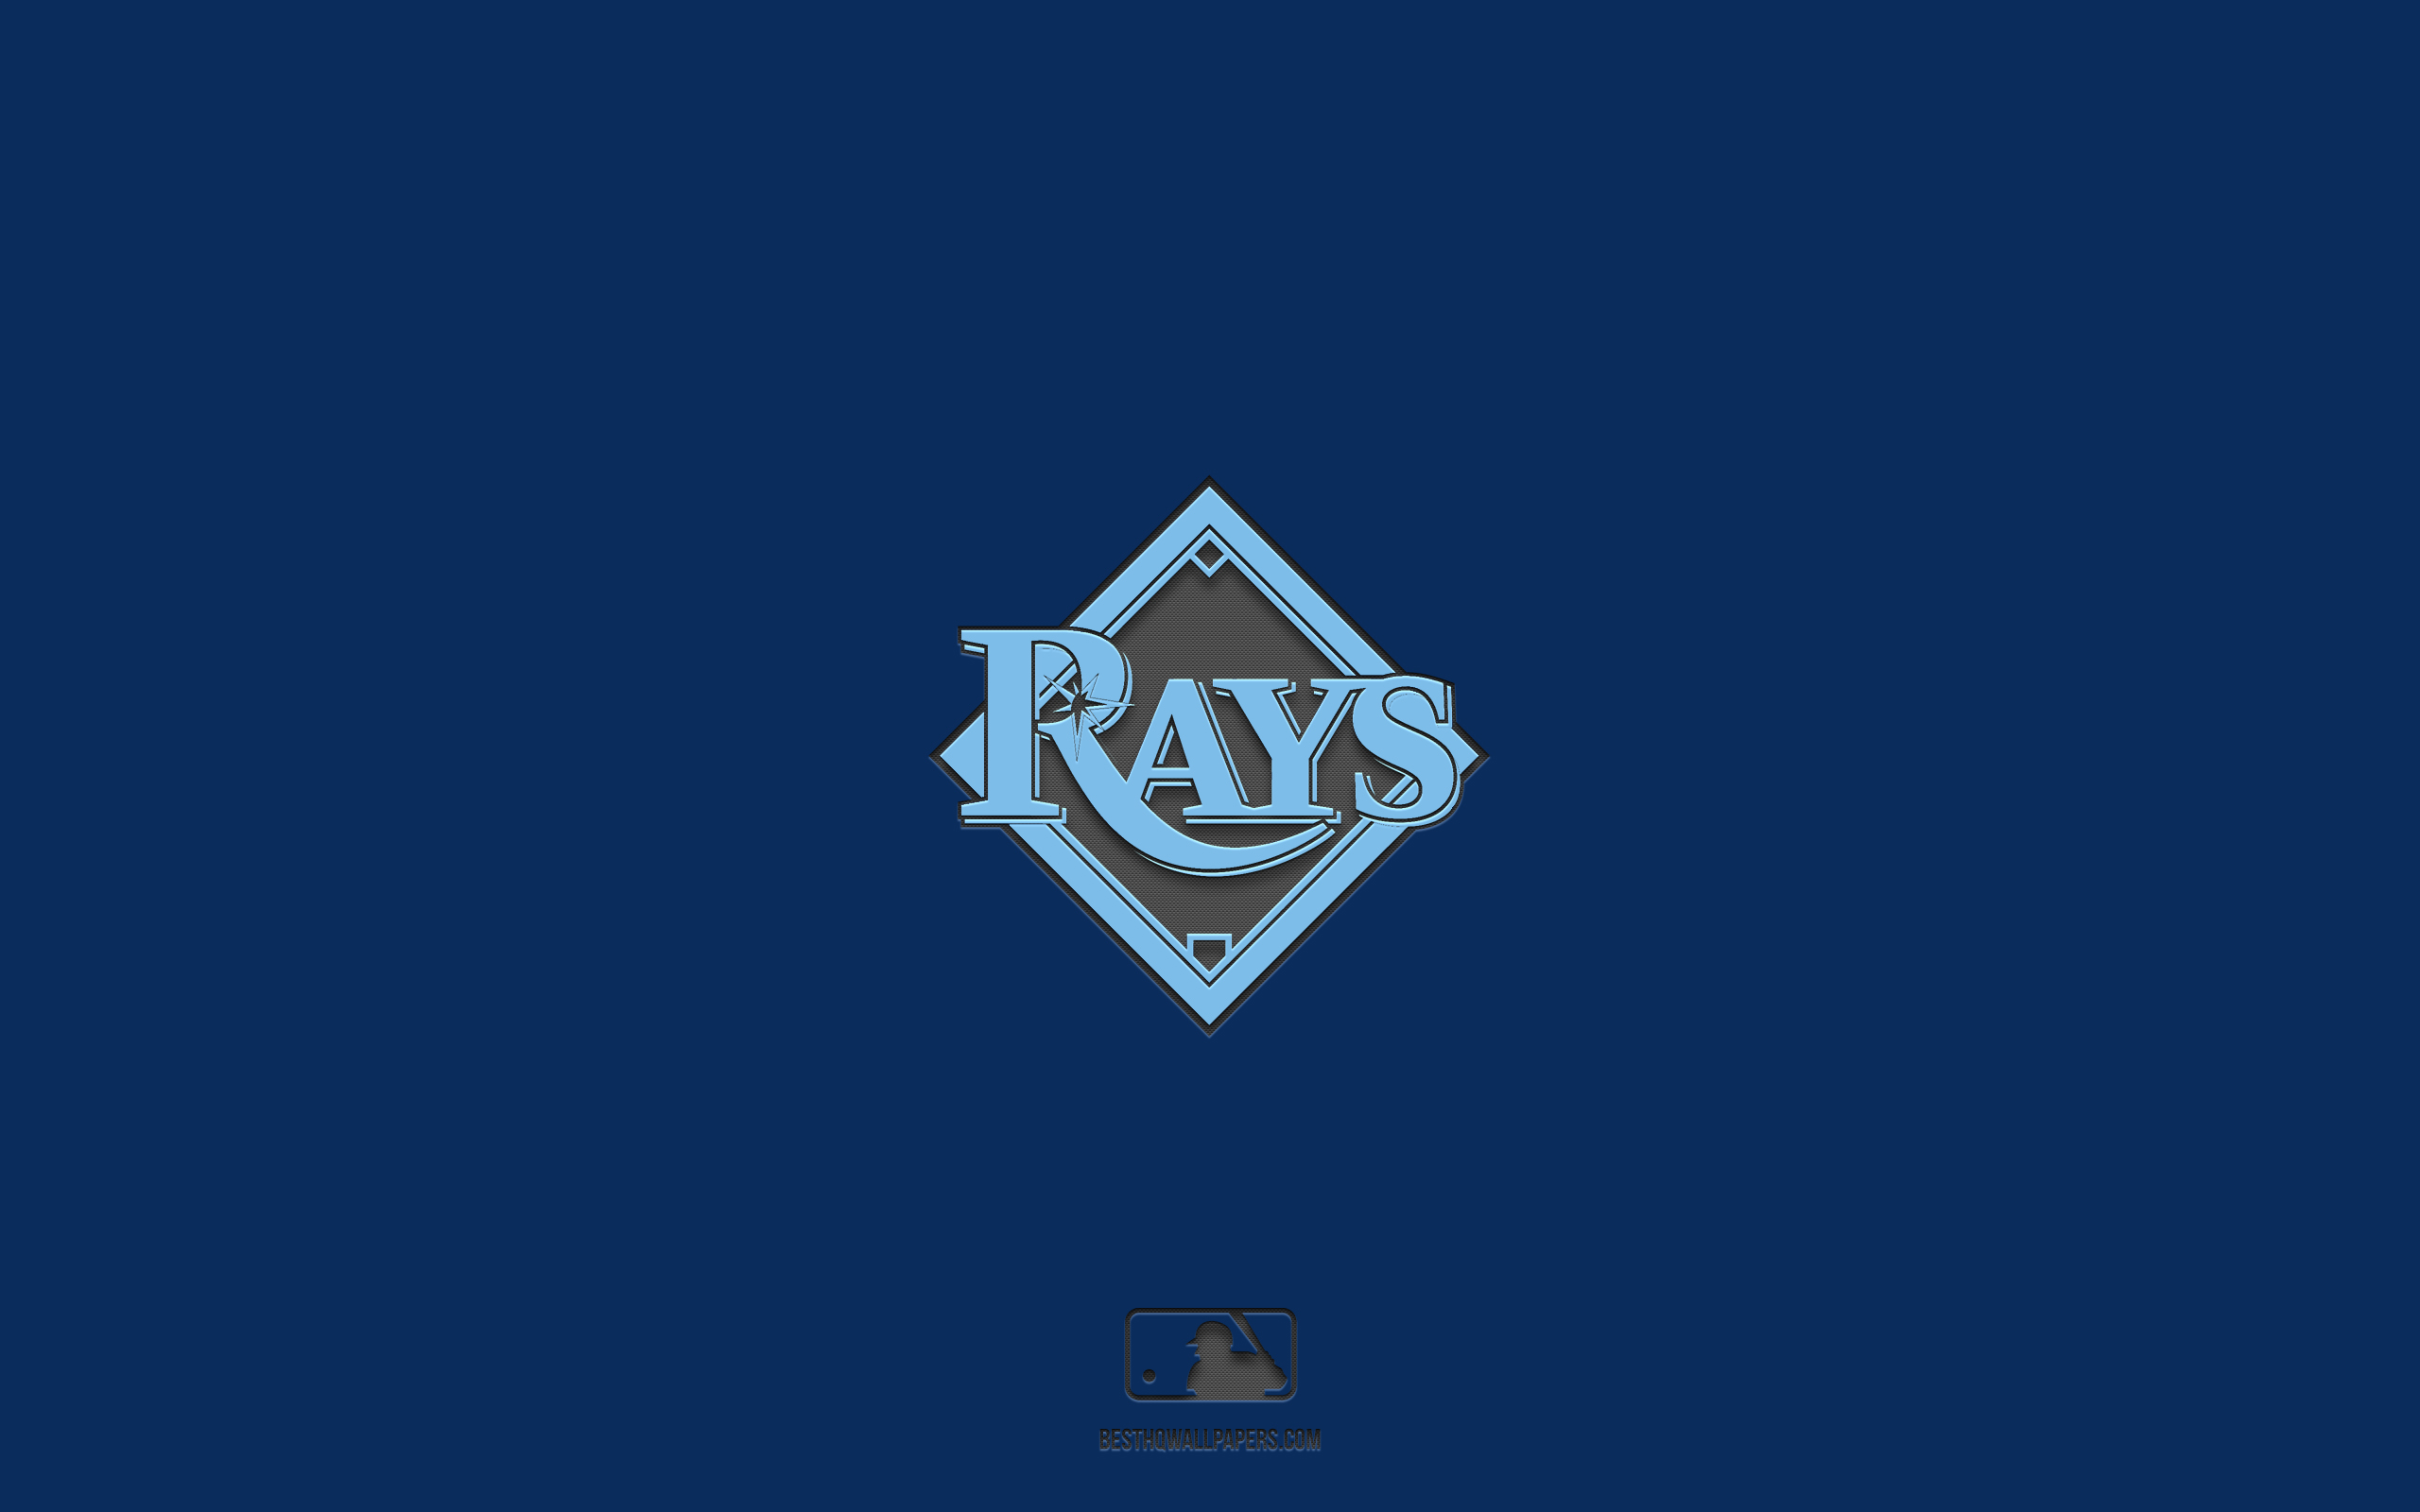 Download wallpaper Tampa Bay Rays, blue background, American baseball team, Tampa Bay Rays emblem, MLB, Florida, USA, baseball, Tampa Bay Rays logo for desktop with resolution 2560x1600. High Quality HD picture wallpaper